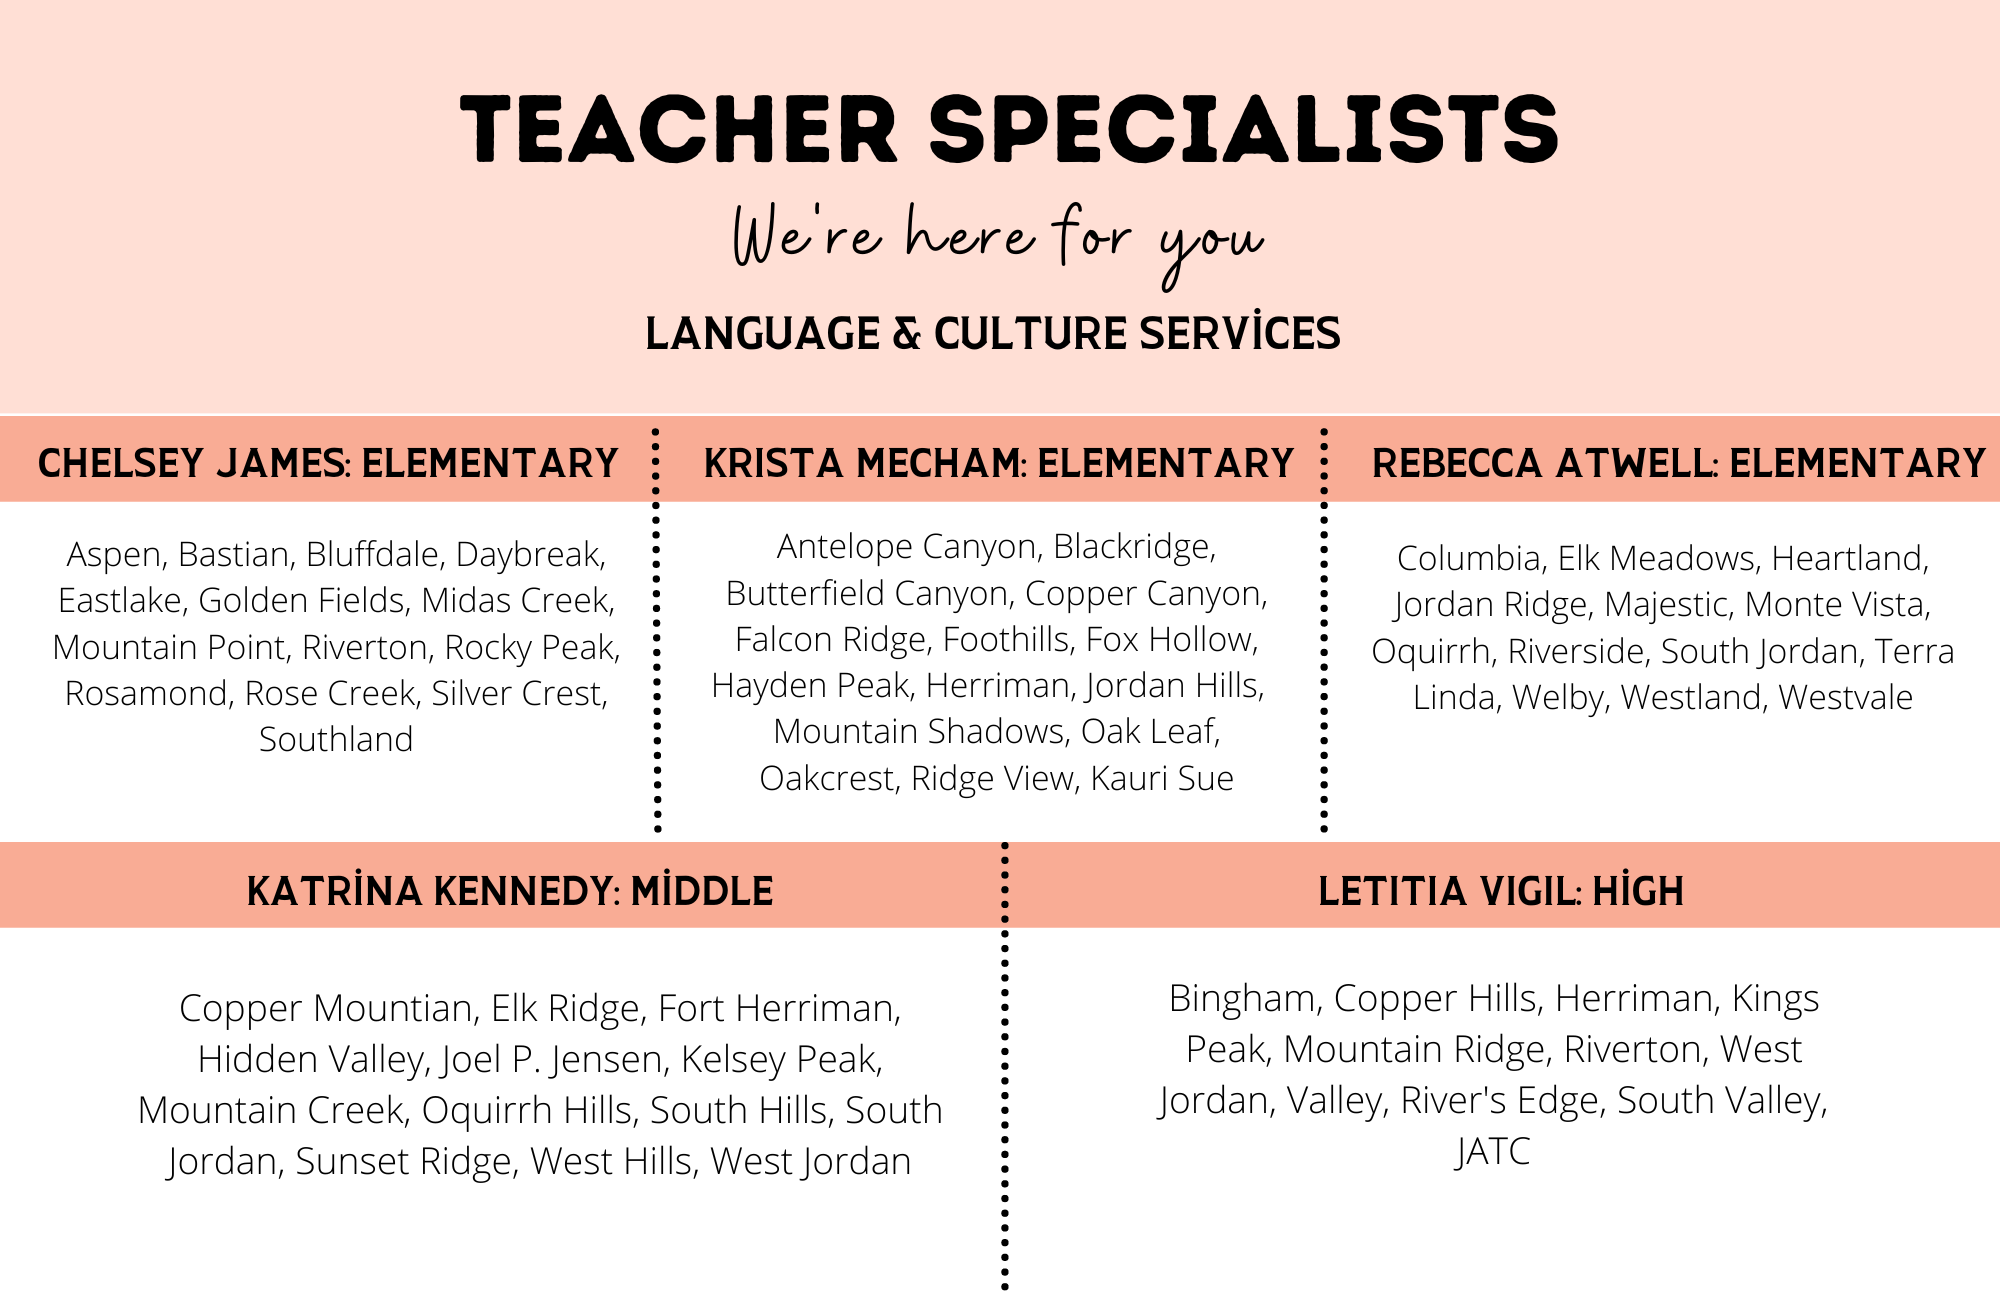 Language teachers specialists and the schools they support. Elementary schools are split between Krista Mecham, Rebecca Atwell, and Chelsey James. Middle schools are covered by Katrina Kennedy, and high schools are covered by Leticia Vigil.